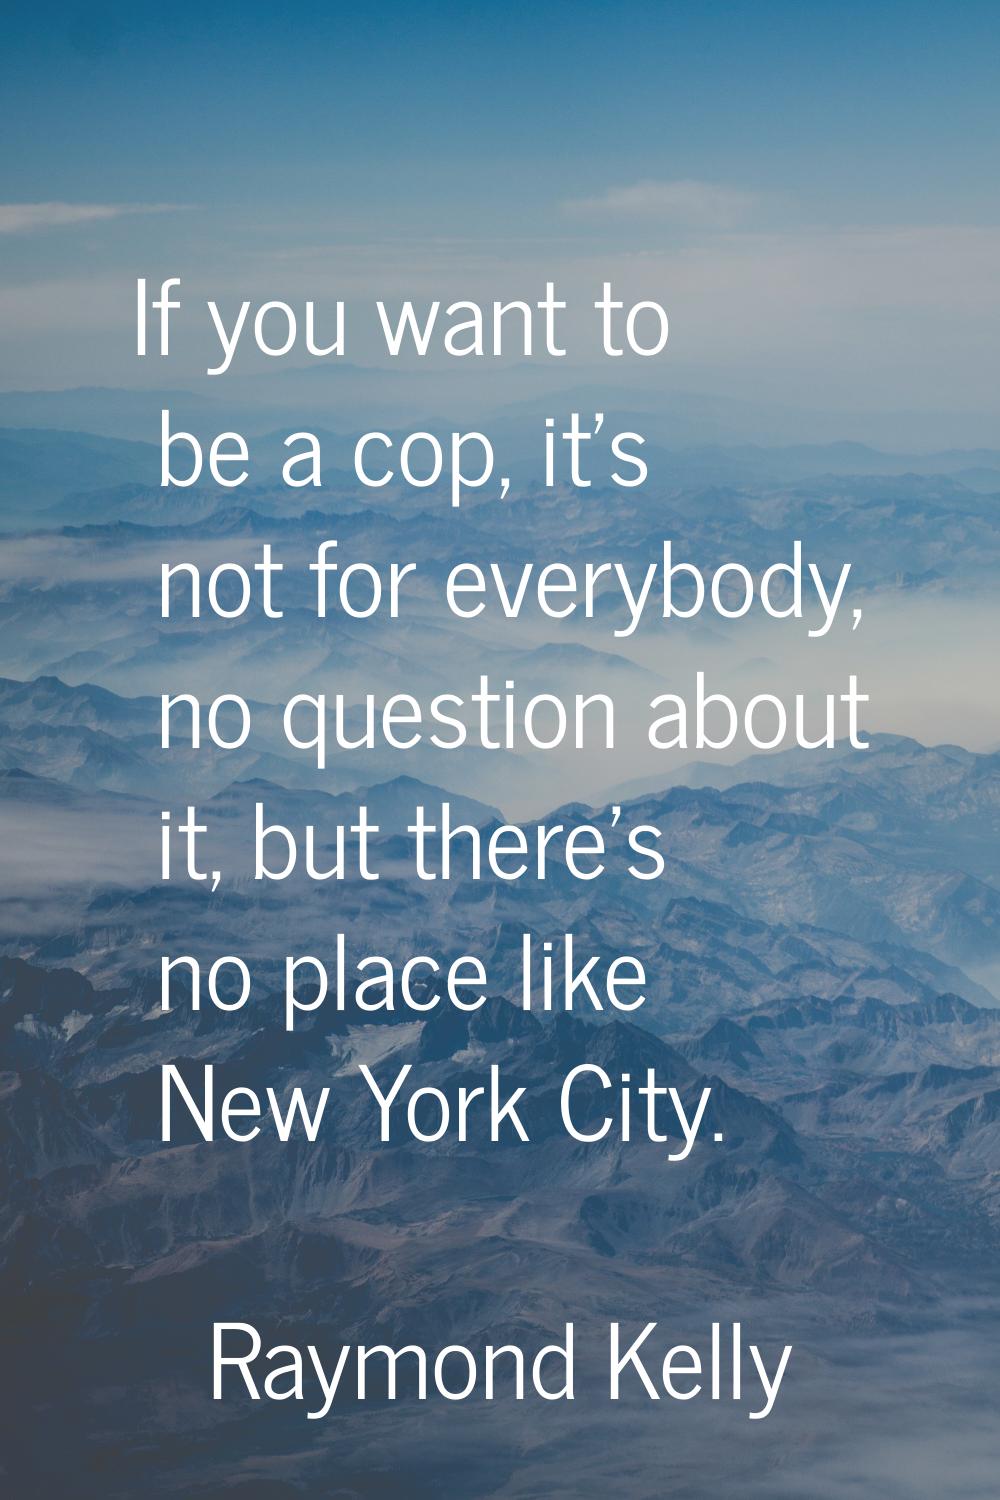 If you want to be a cop, it's not for everybody, no question about it, but there's no place like Ne